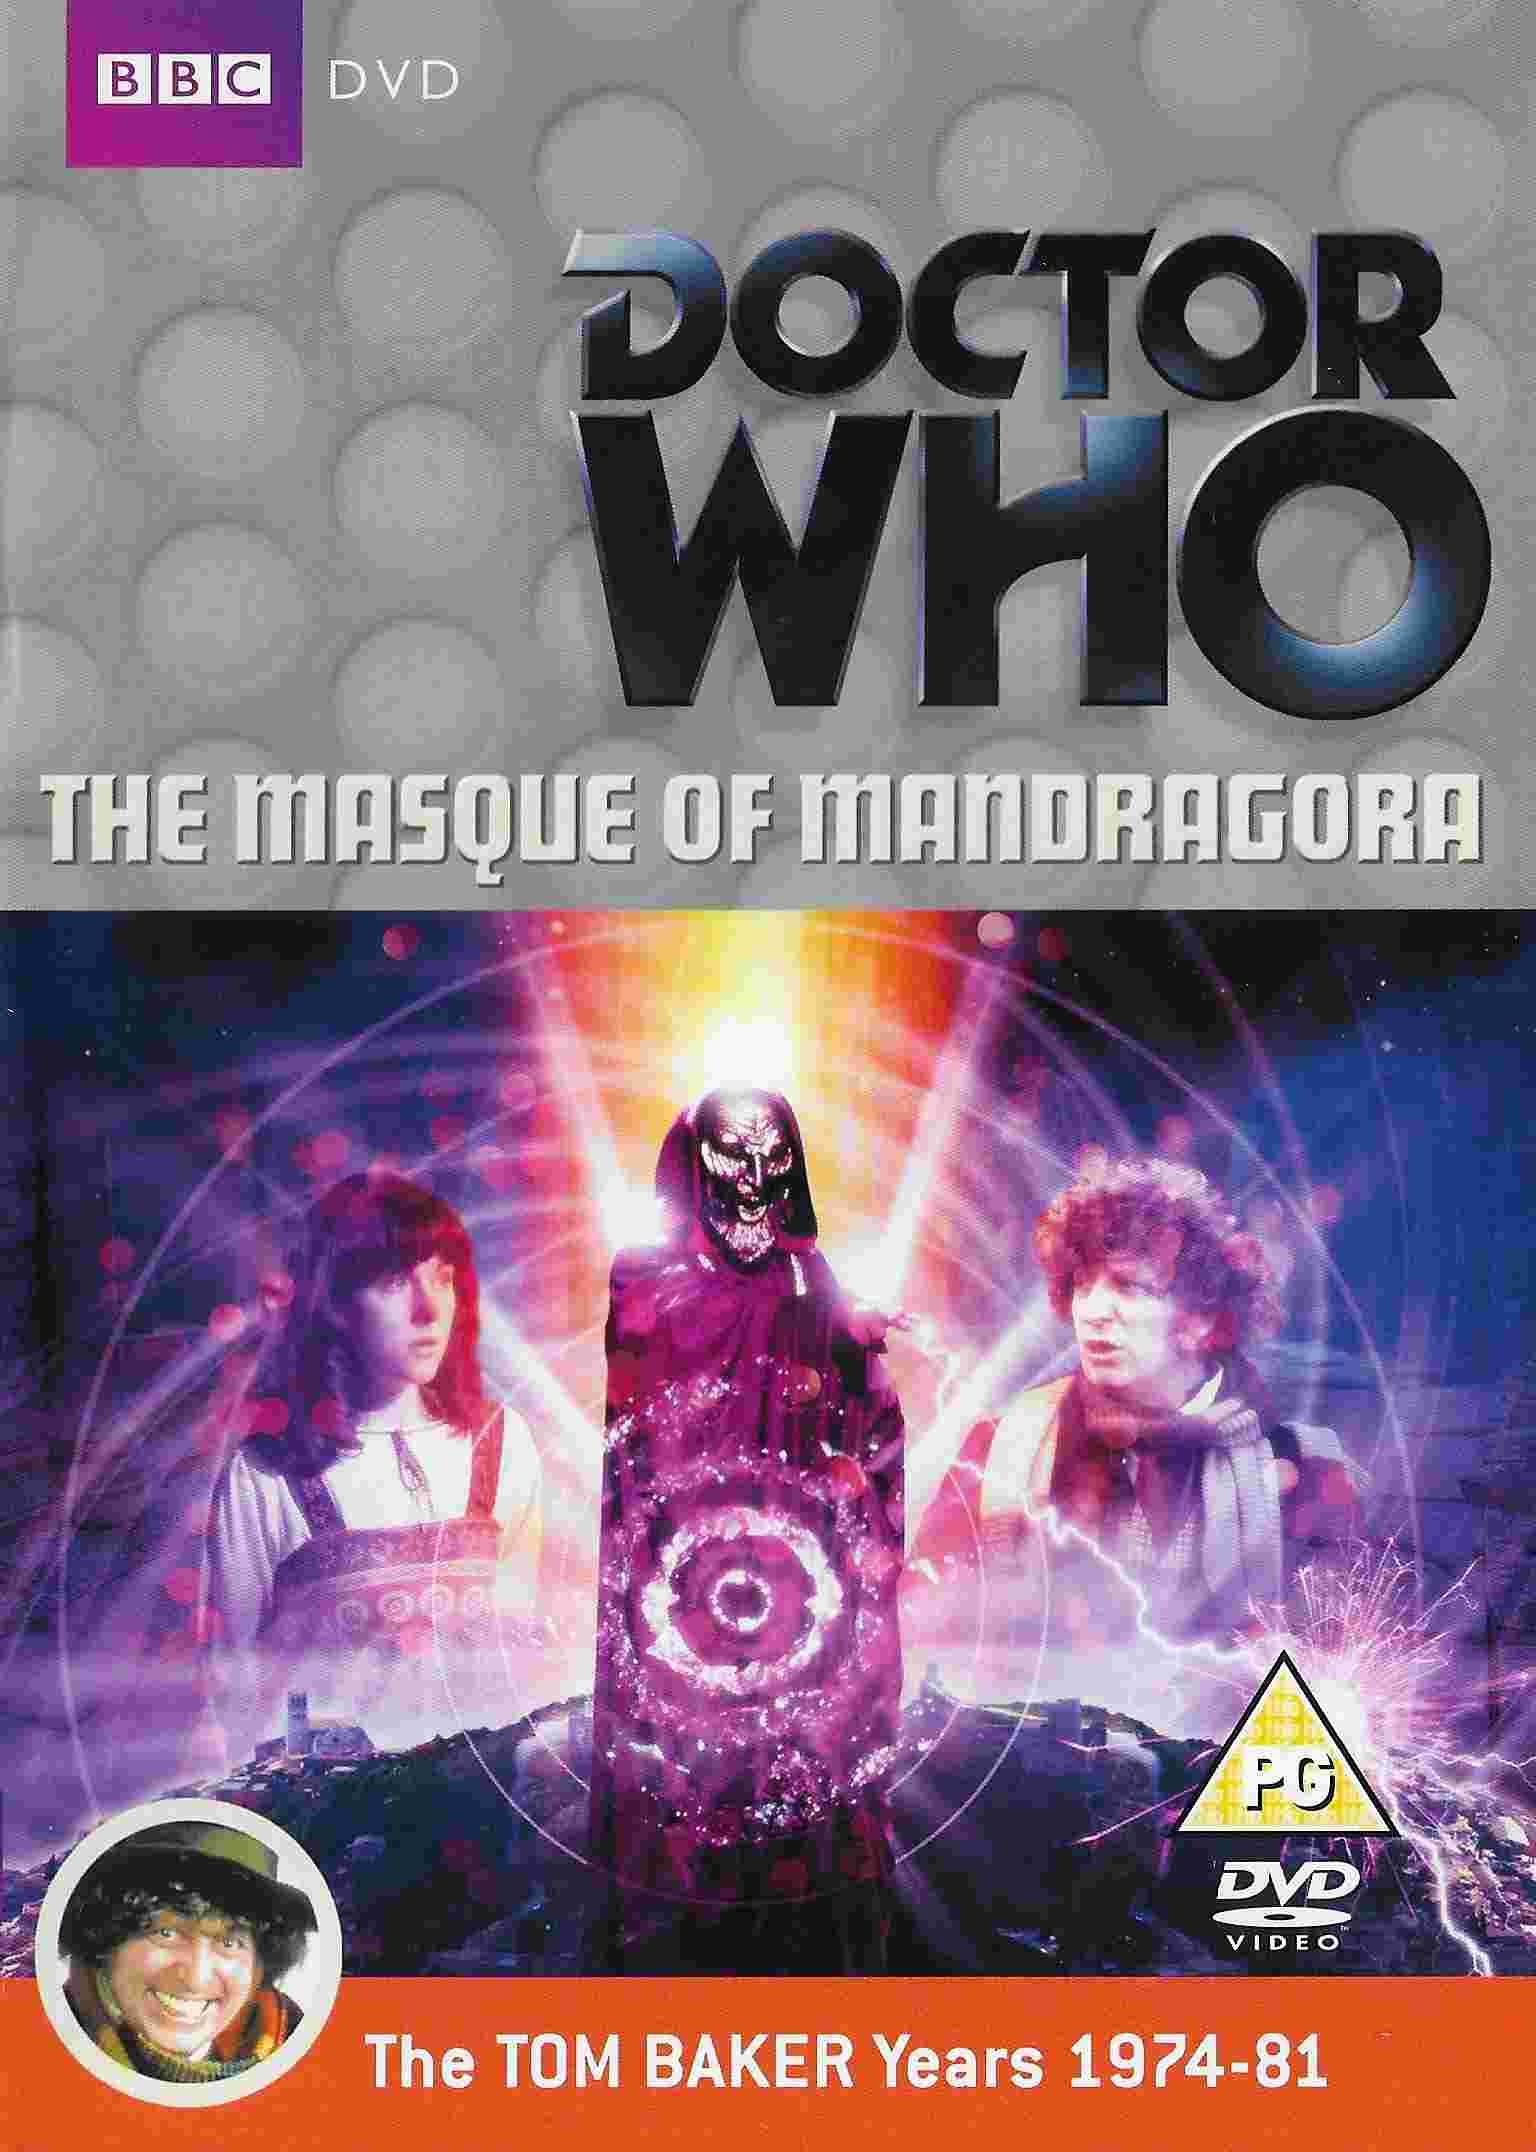 Picture of BBCDVD 2805 Doctor Who - The masque of Mandragona by artist Terry Nation from the BBC dvds - Records and Tapes library